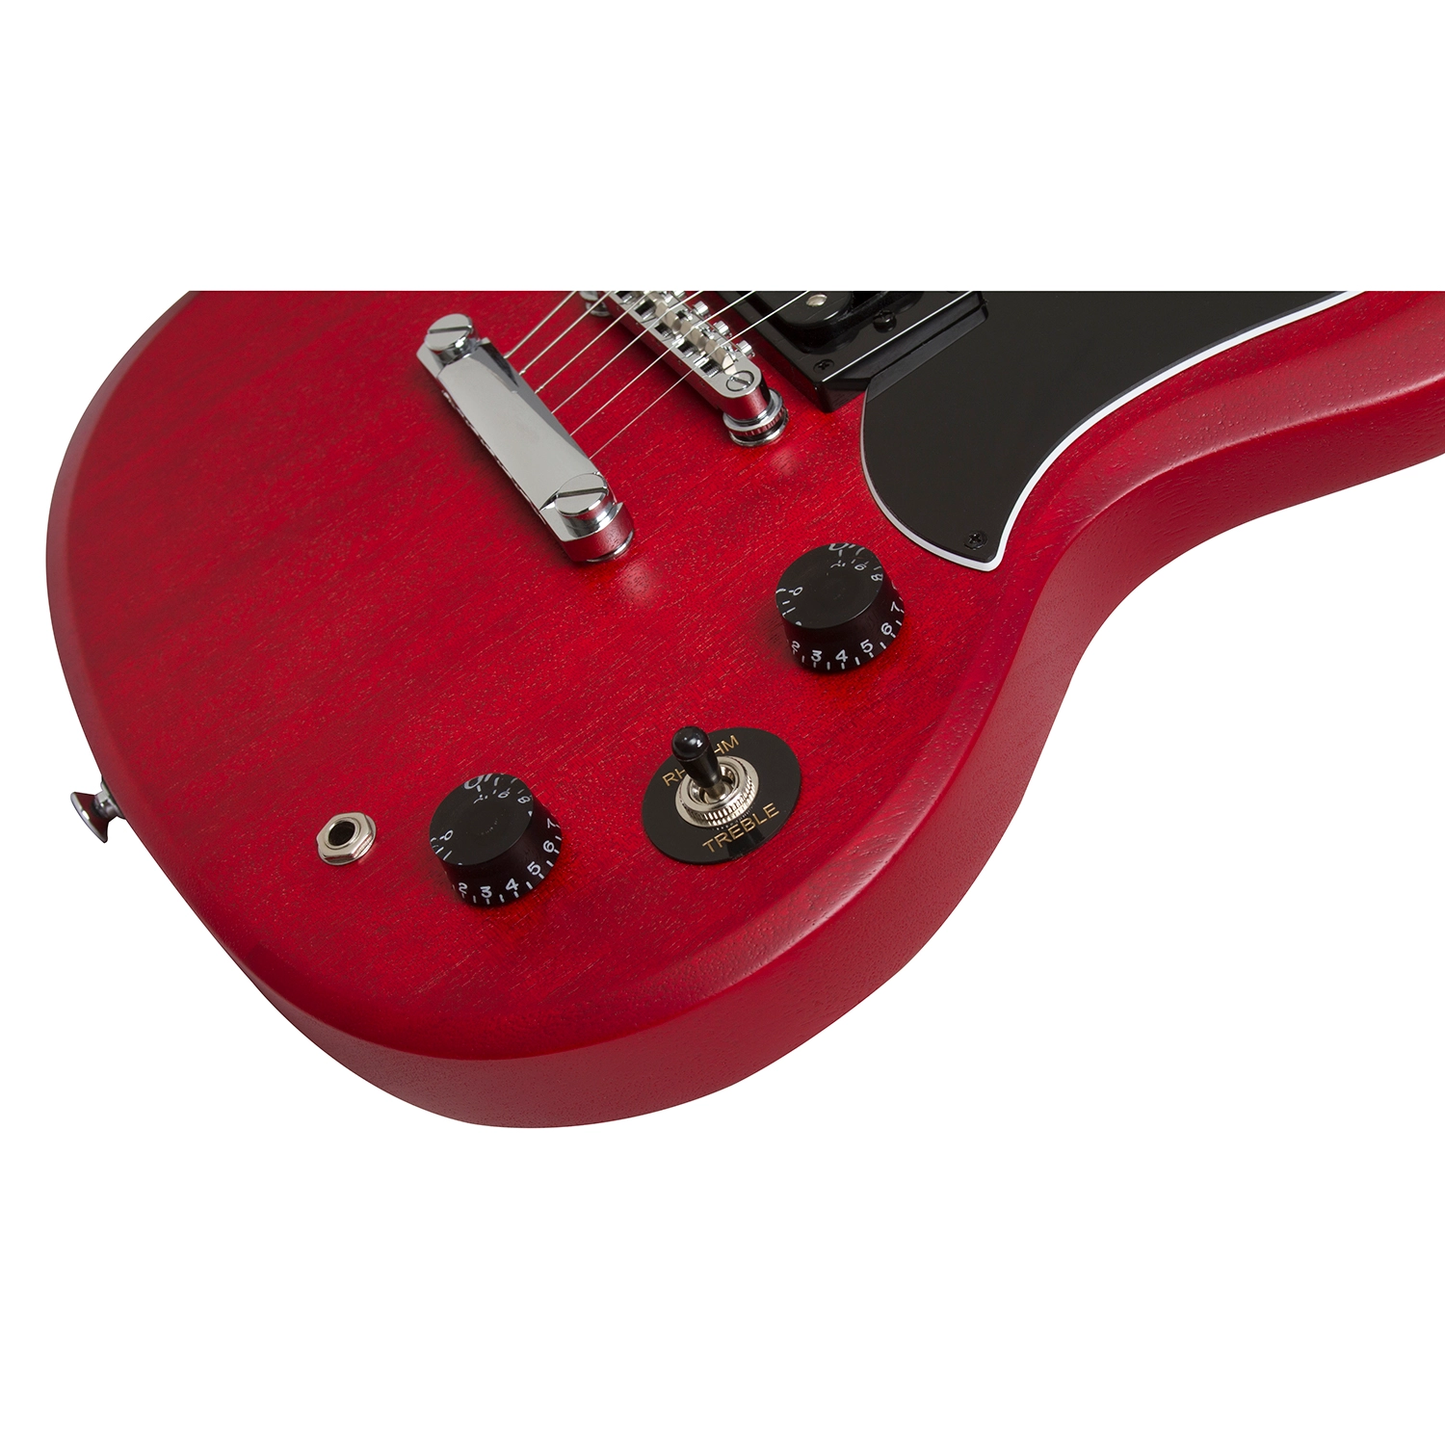 Epiphone SG Special VE 22-Fret HH Electric Guitar with Vintage Worn Finish (Available in Ebony Black, Cherry Red and Walnut Brown) | EGSV Series